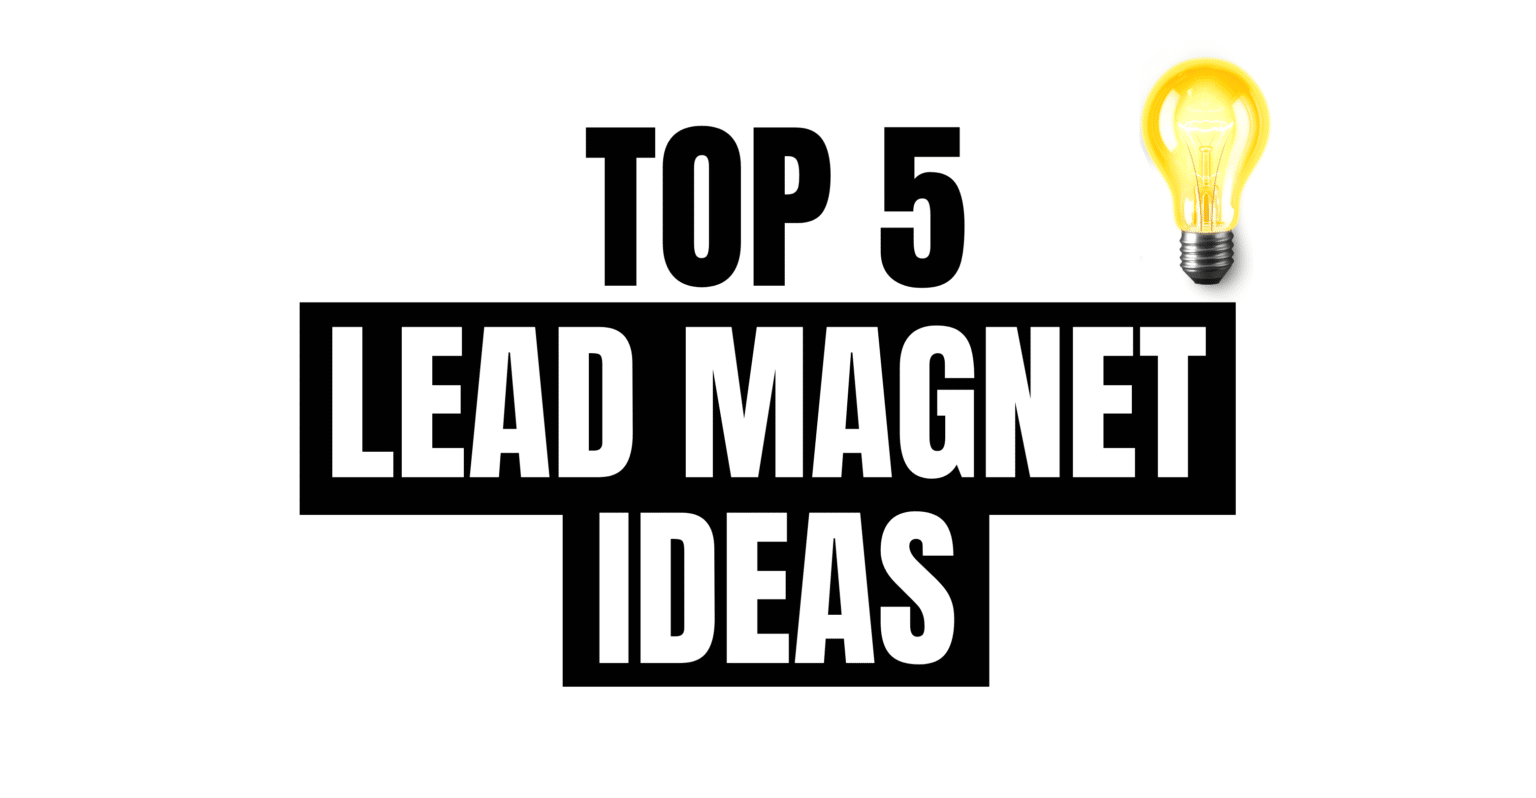 5 Lead Magnet Ideas To Grow Your Email List featured image